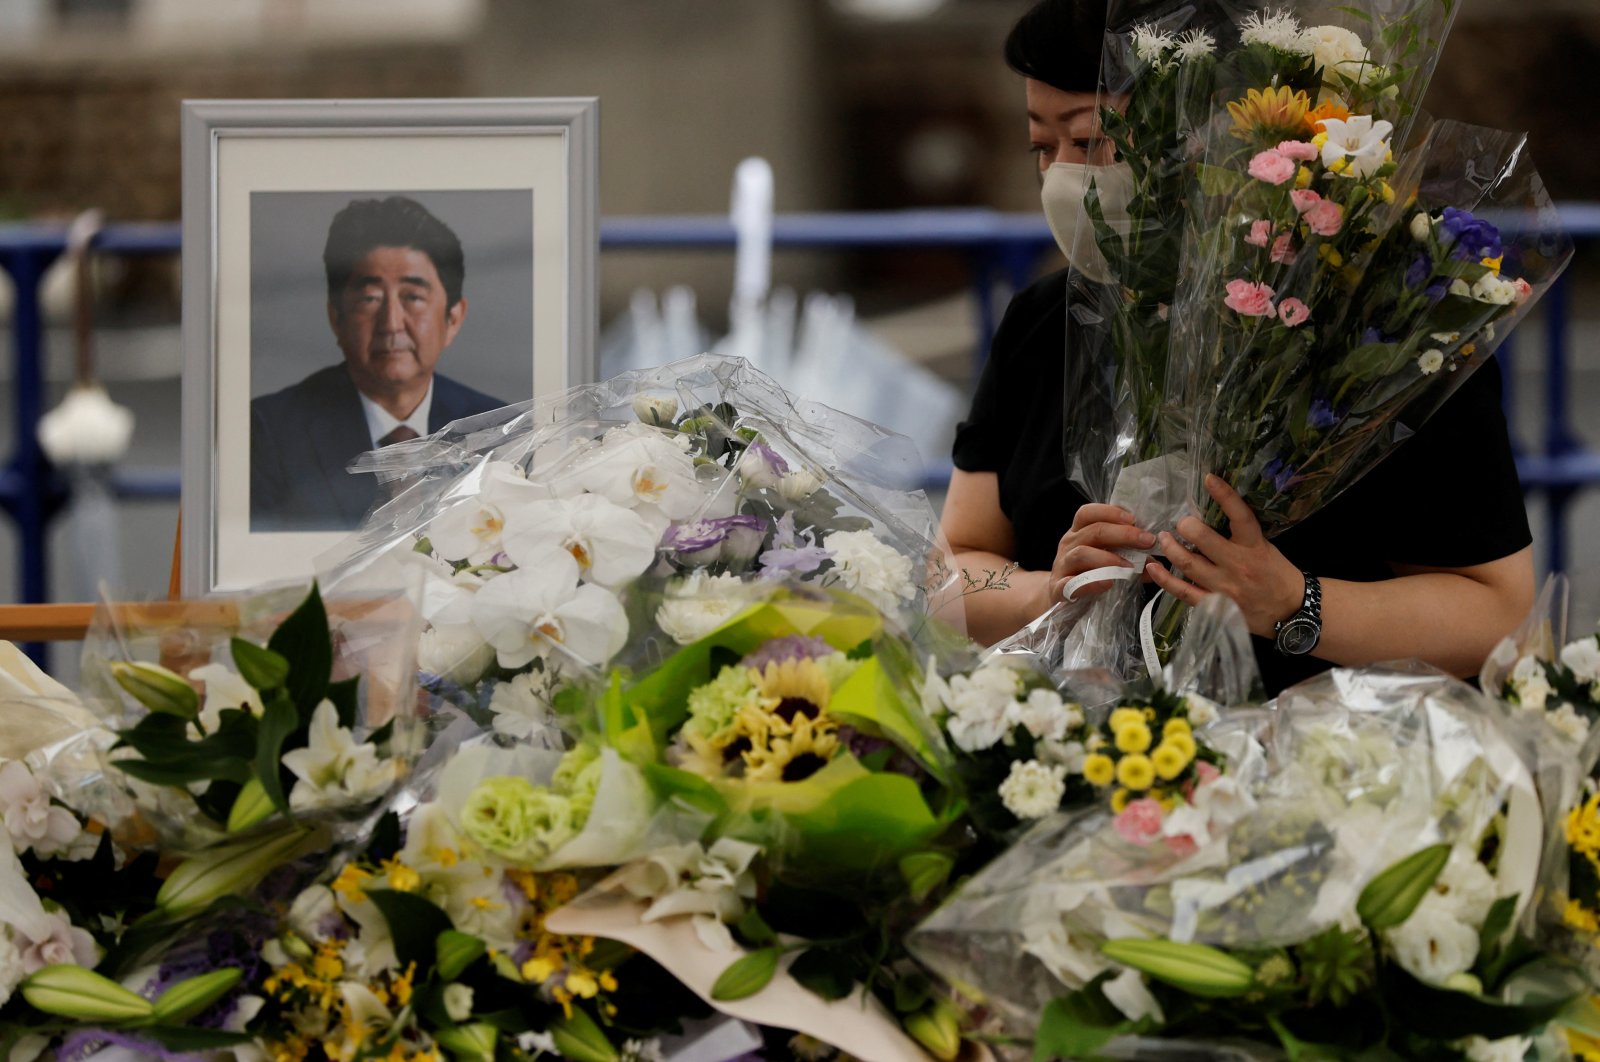 A mourner offers flowers next to a picture of late former Japanese Prime Minister Shinzo Abe, who was shot while campaigning for a parliamentary election, on the day to mark a week after his assassination at the Liberal Democratic Party headquarters, in Tokyo, Japan, July 15, 2022. (Reuters Photo)